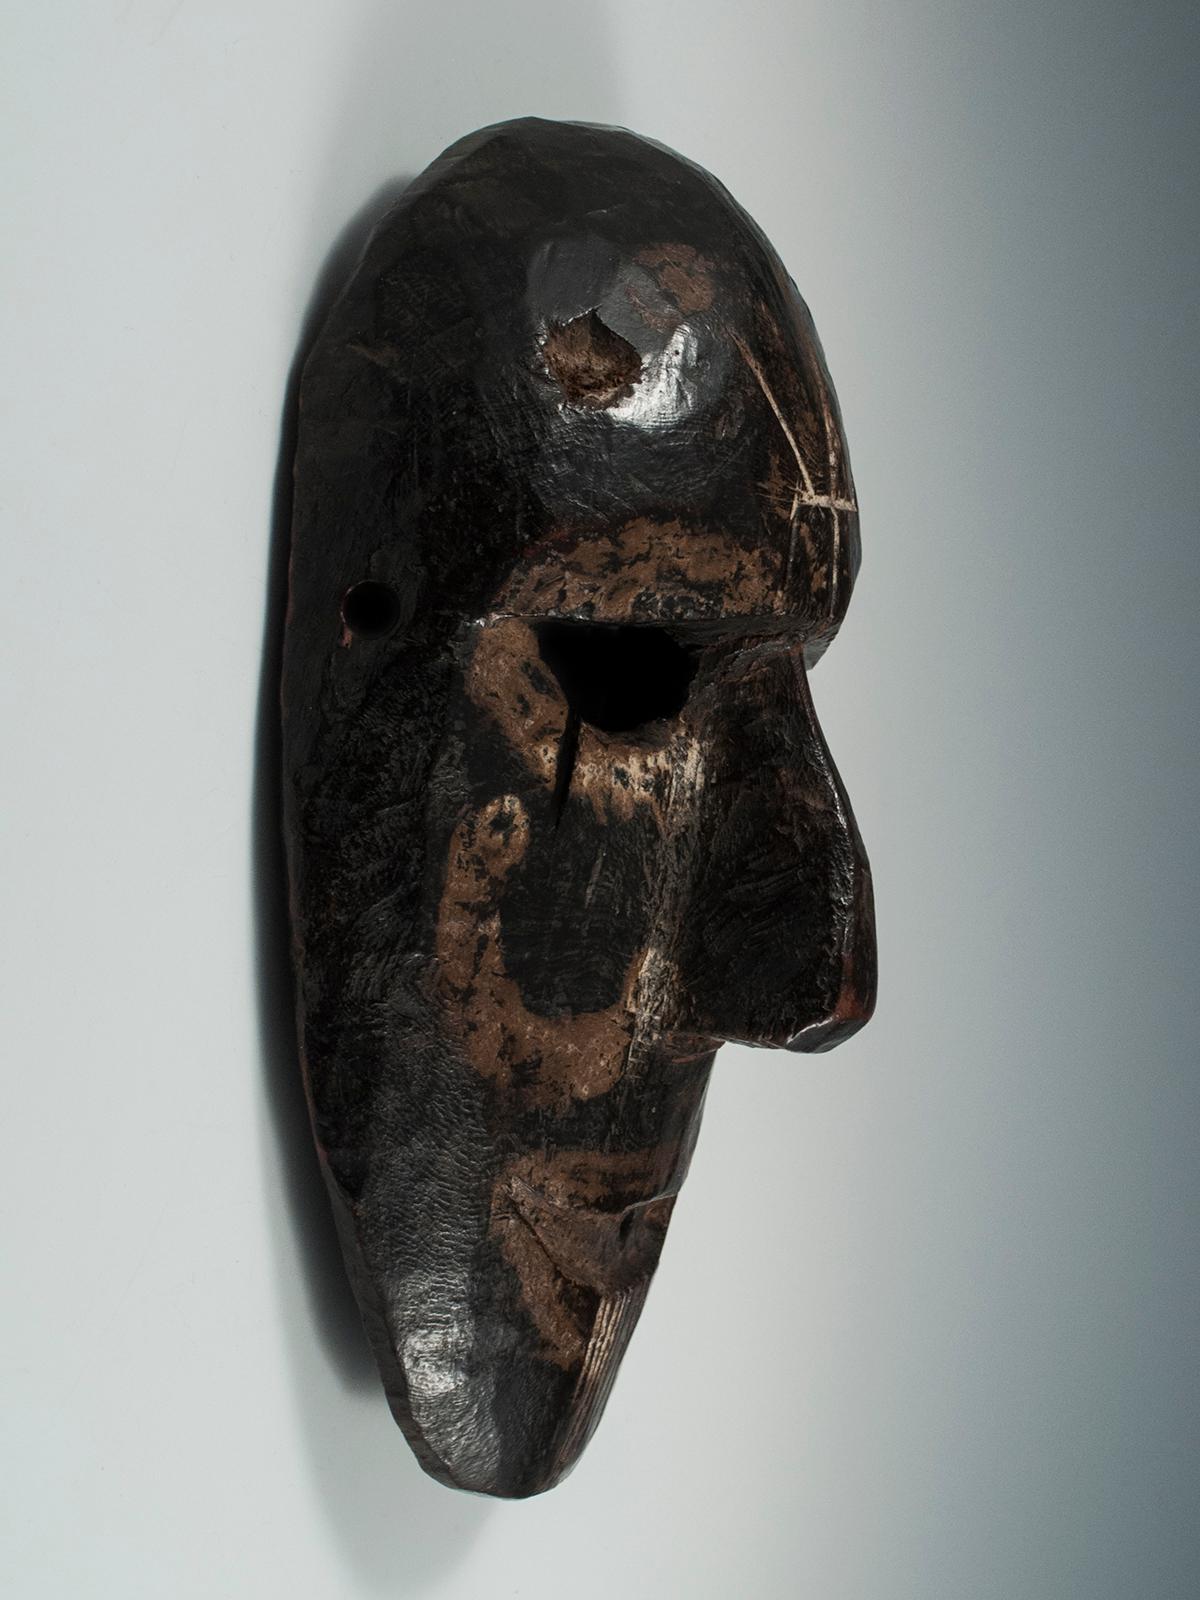 Early to mid-20th century Tribal mask, Middle Hills, Nepal

A Middle Hills mask with several unusual markings: a trisula carved into the forehead, white painted semicircle on left cheek and paint around eyes and mouth, several vertical incised